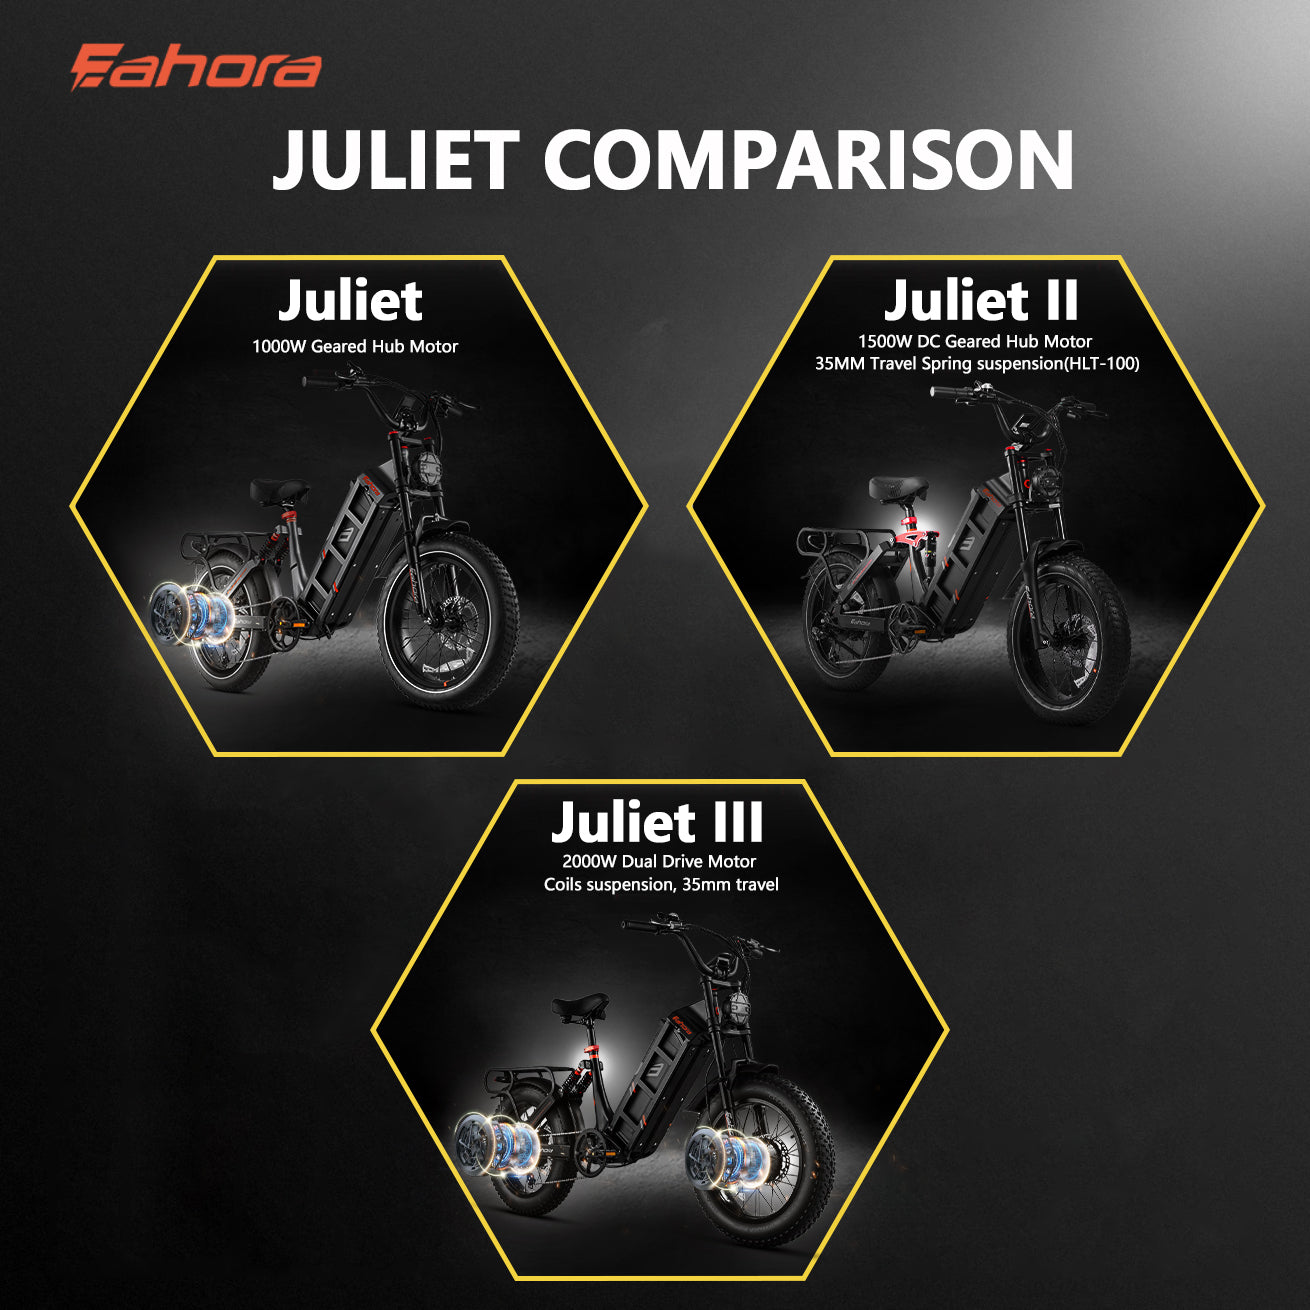 Explore the Eahora Juliet Series: Ultimate Guide